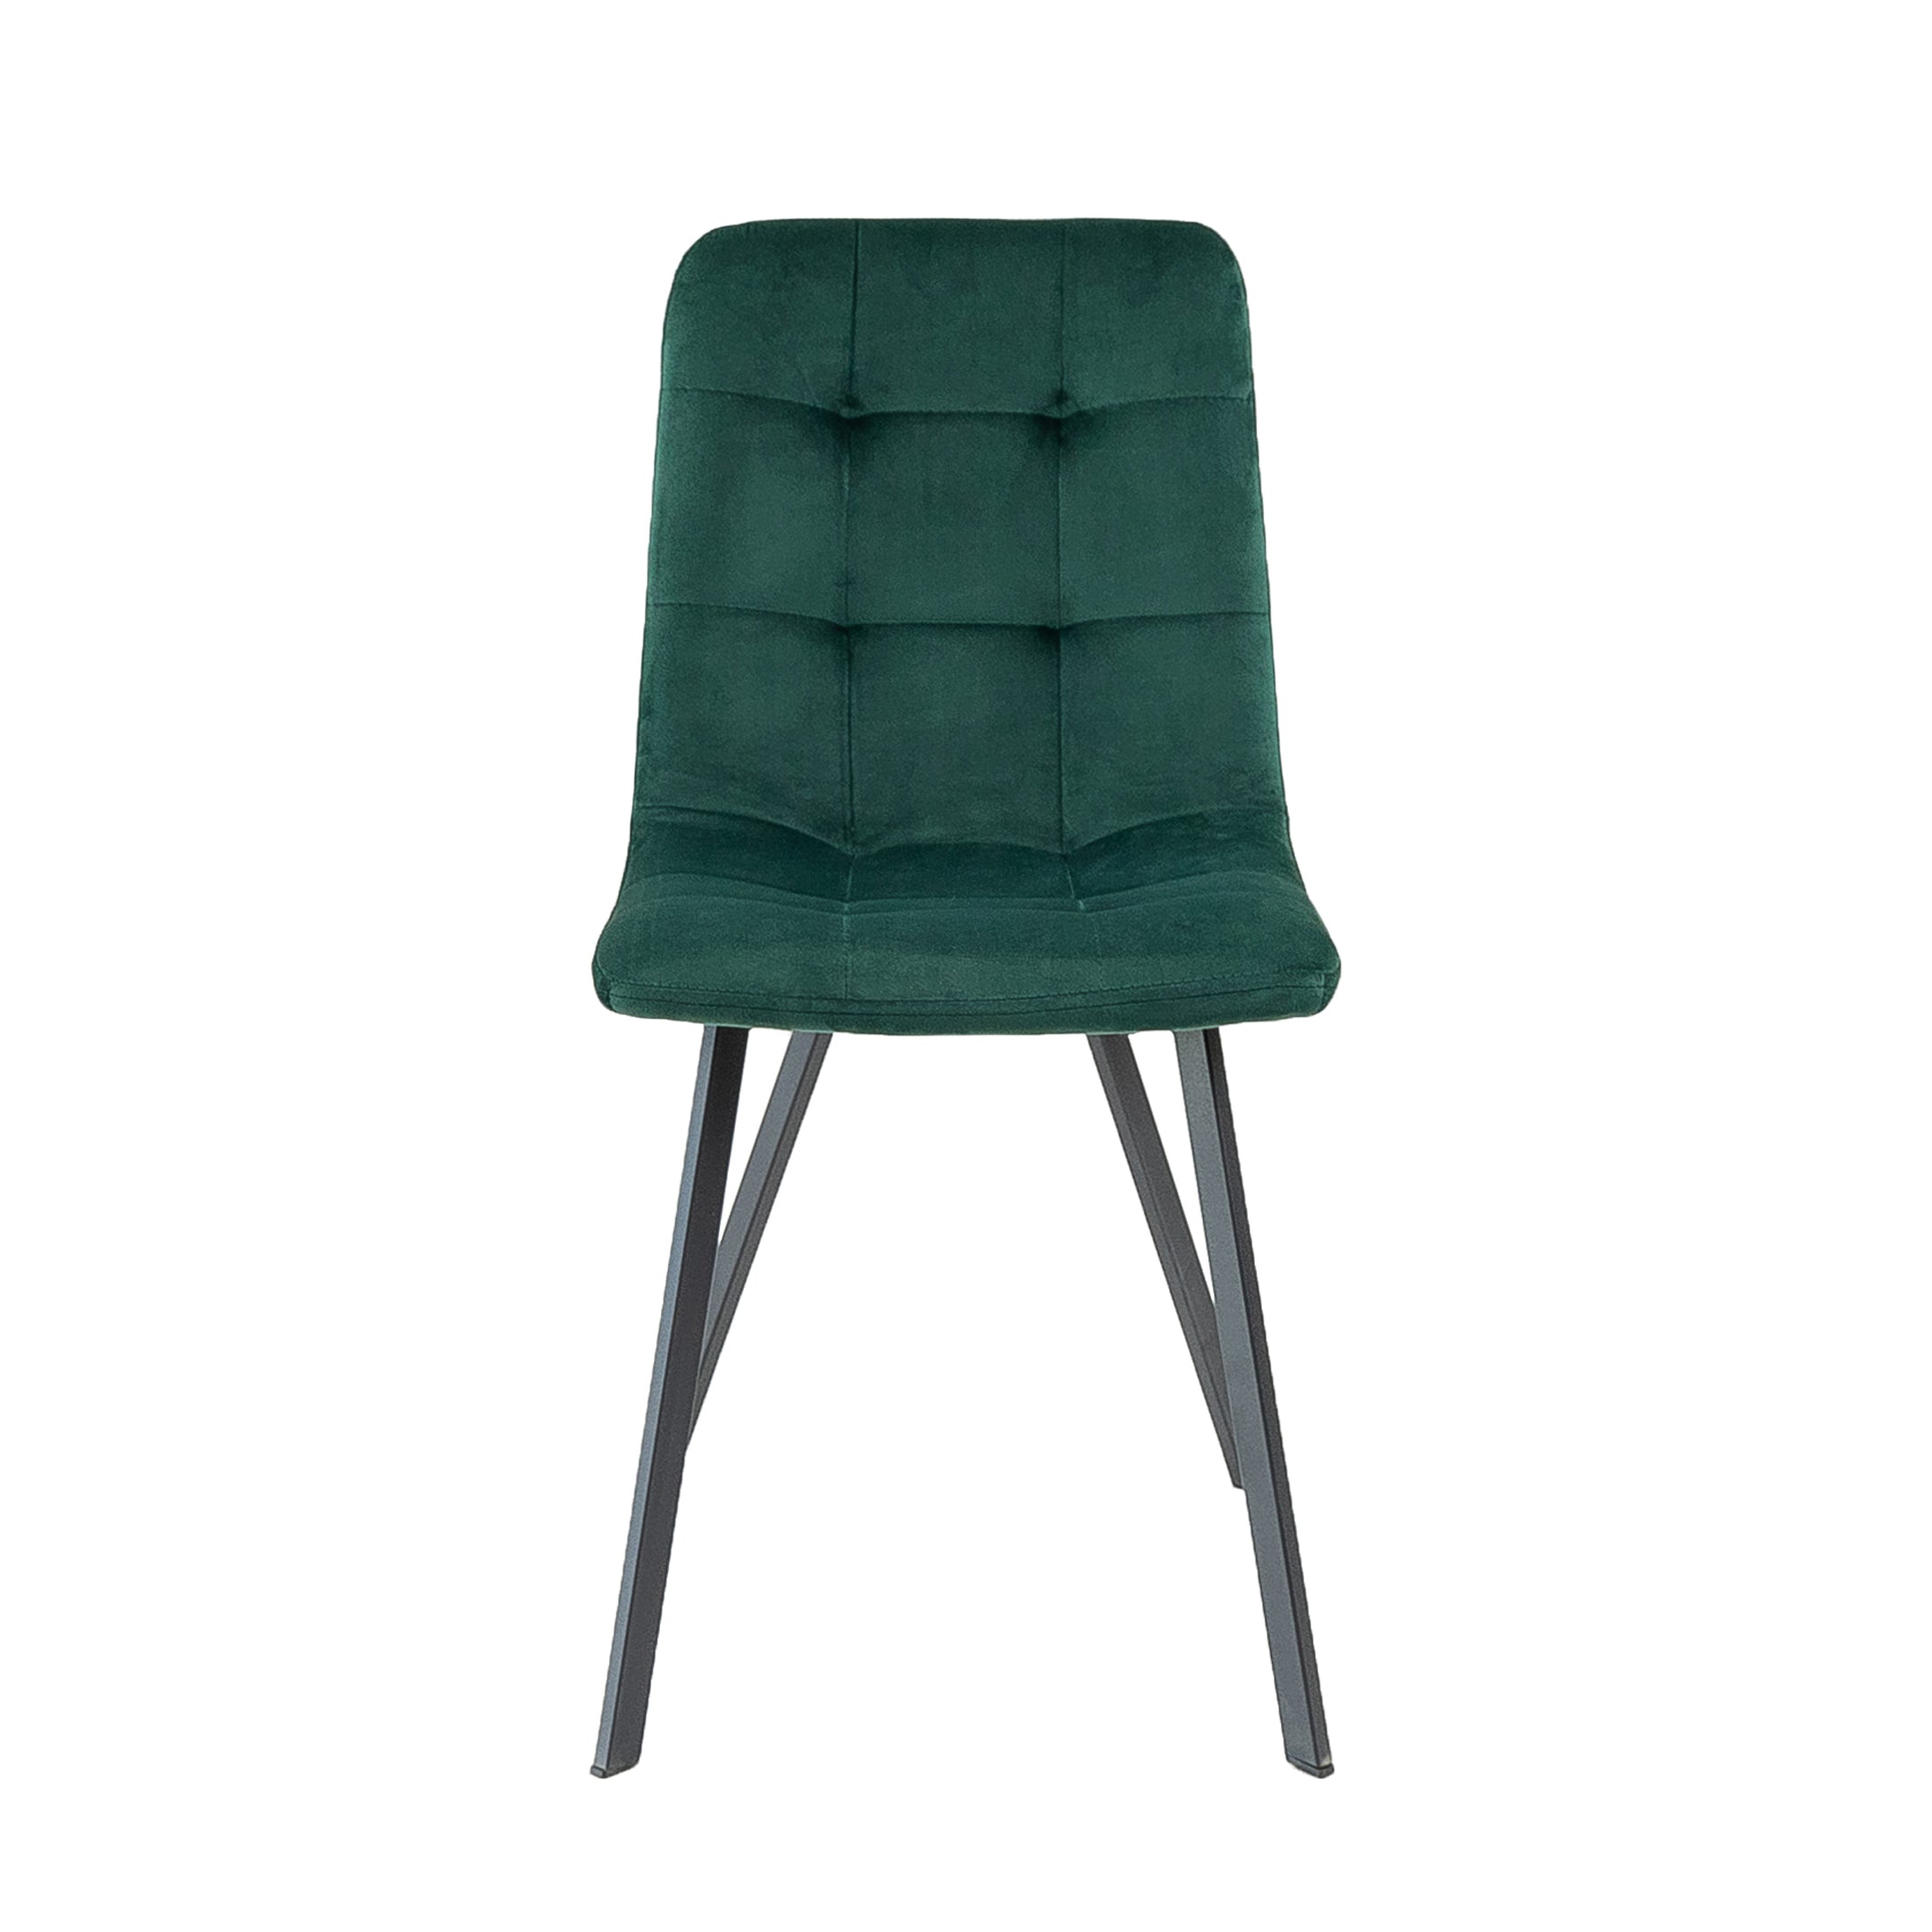 Kick dining room chair Monz